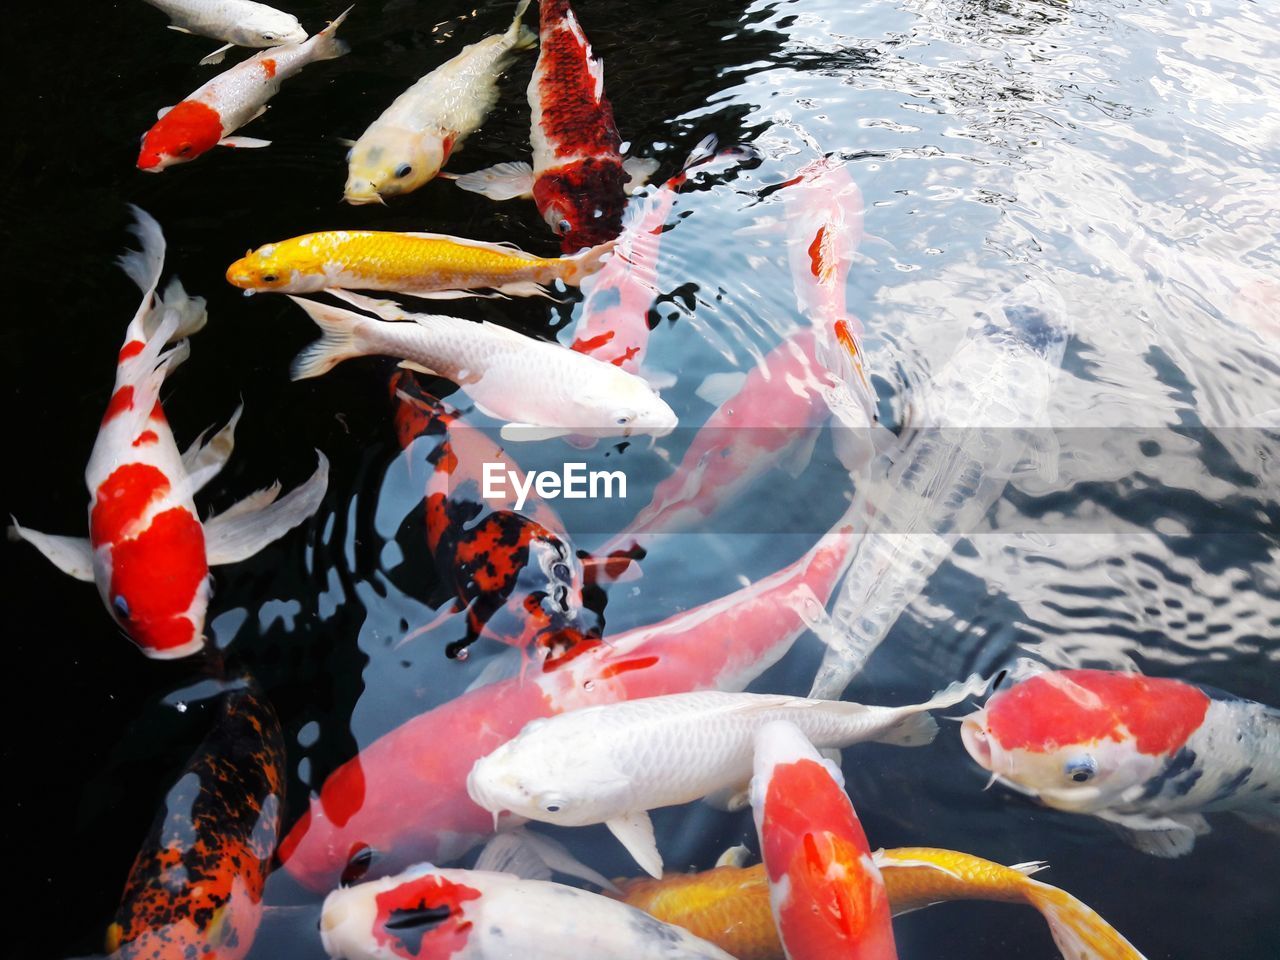 VIEW OF KOI FISH IN WATER